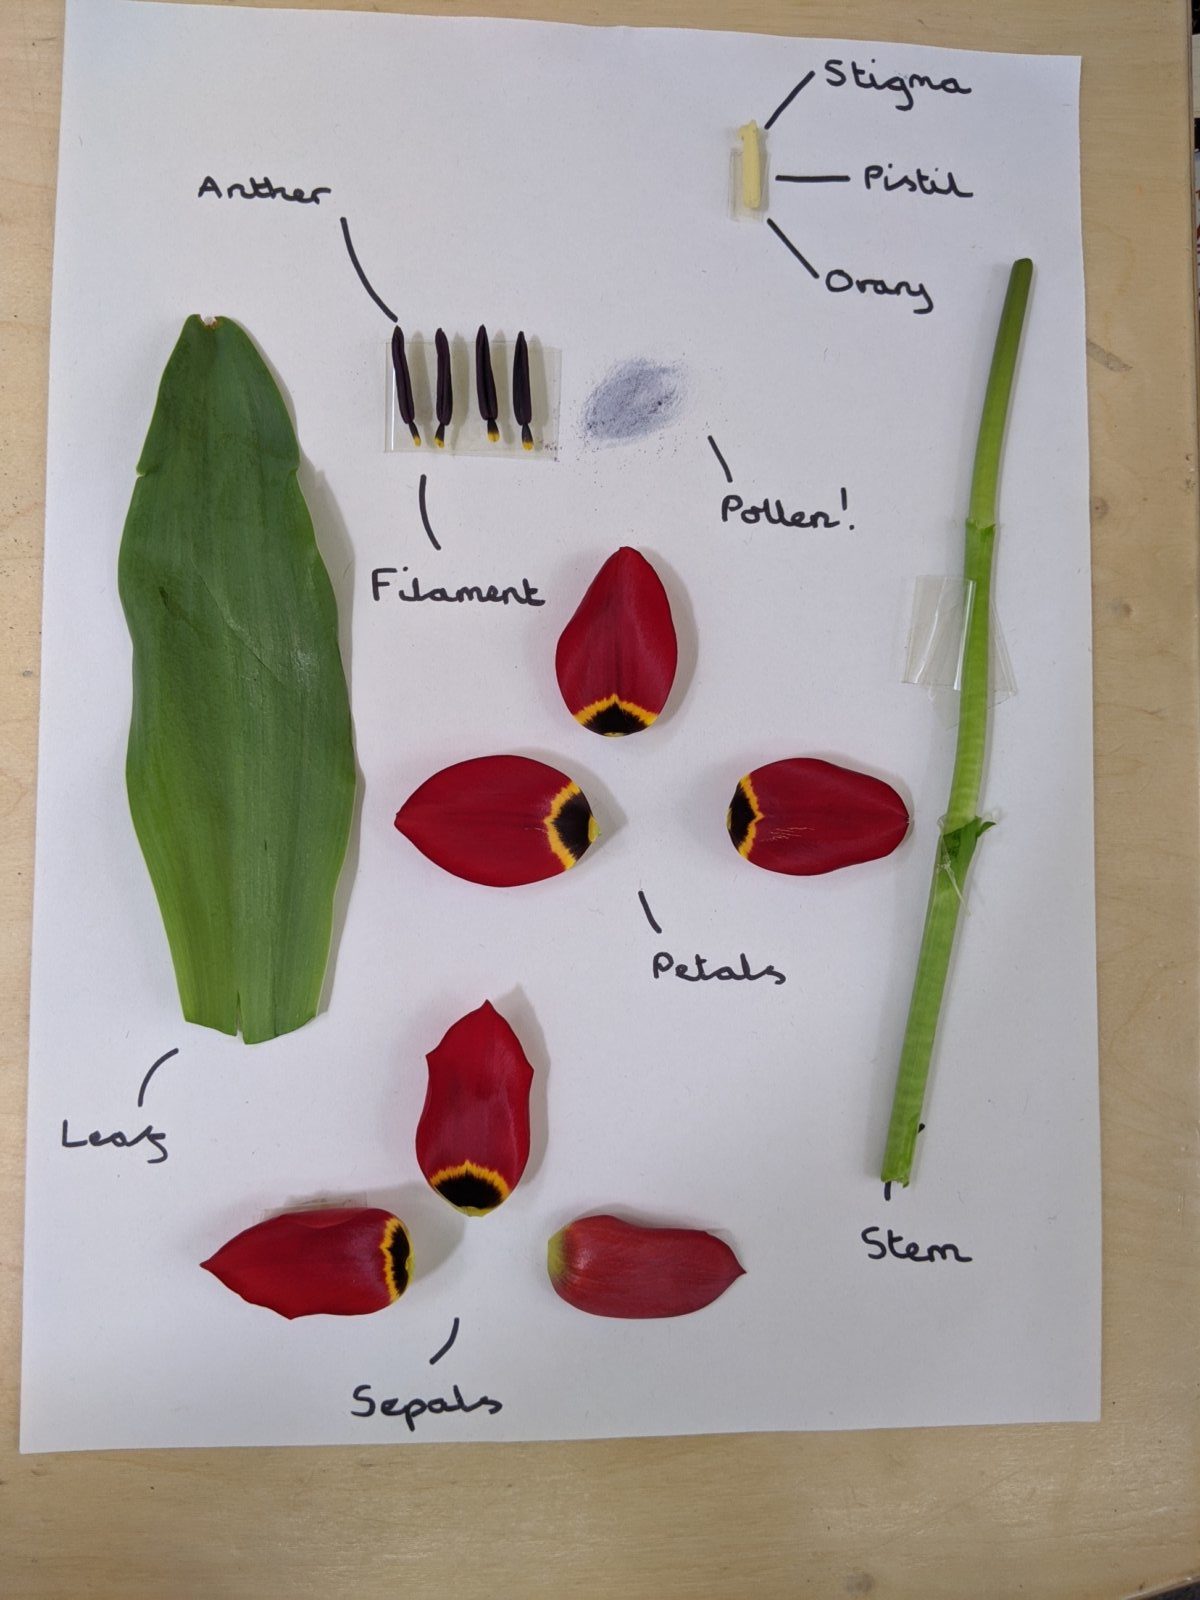 home-learning-flower-dissection-eleanor-palmer-primary-school